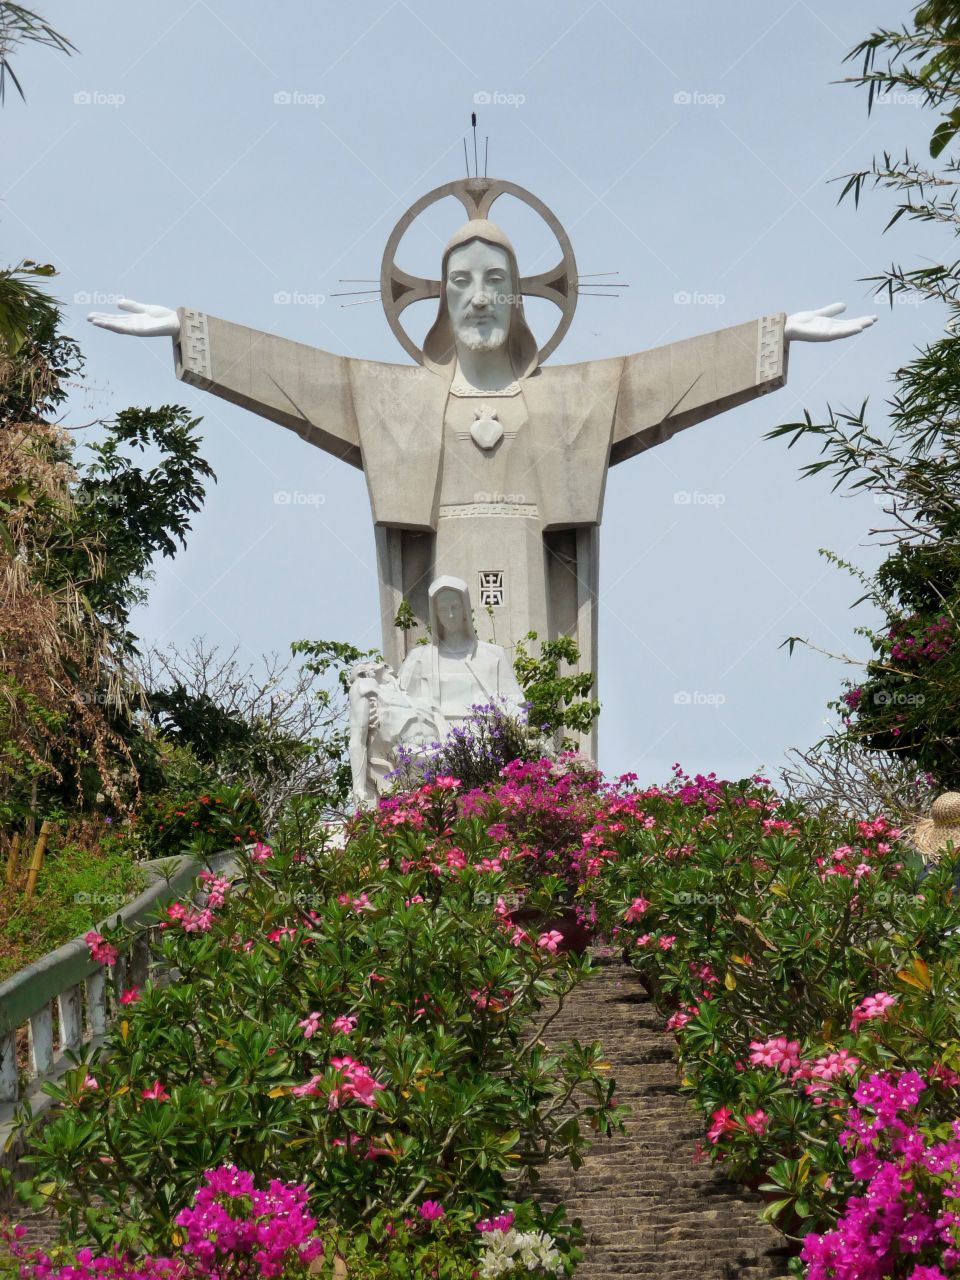 Stairway to the Statue . The Jesus Statue in Vung Tau is the largest in the world. To get there, you have to climb around 900 stairs.